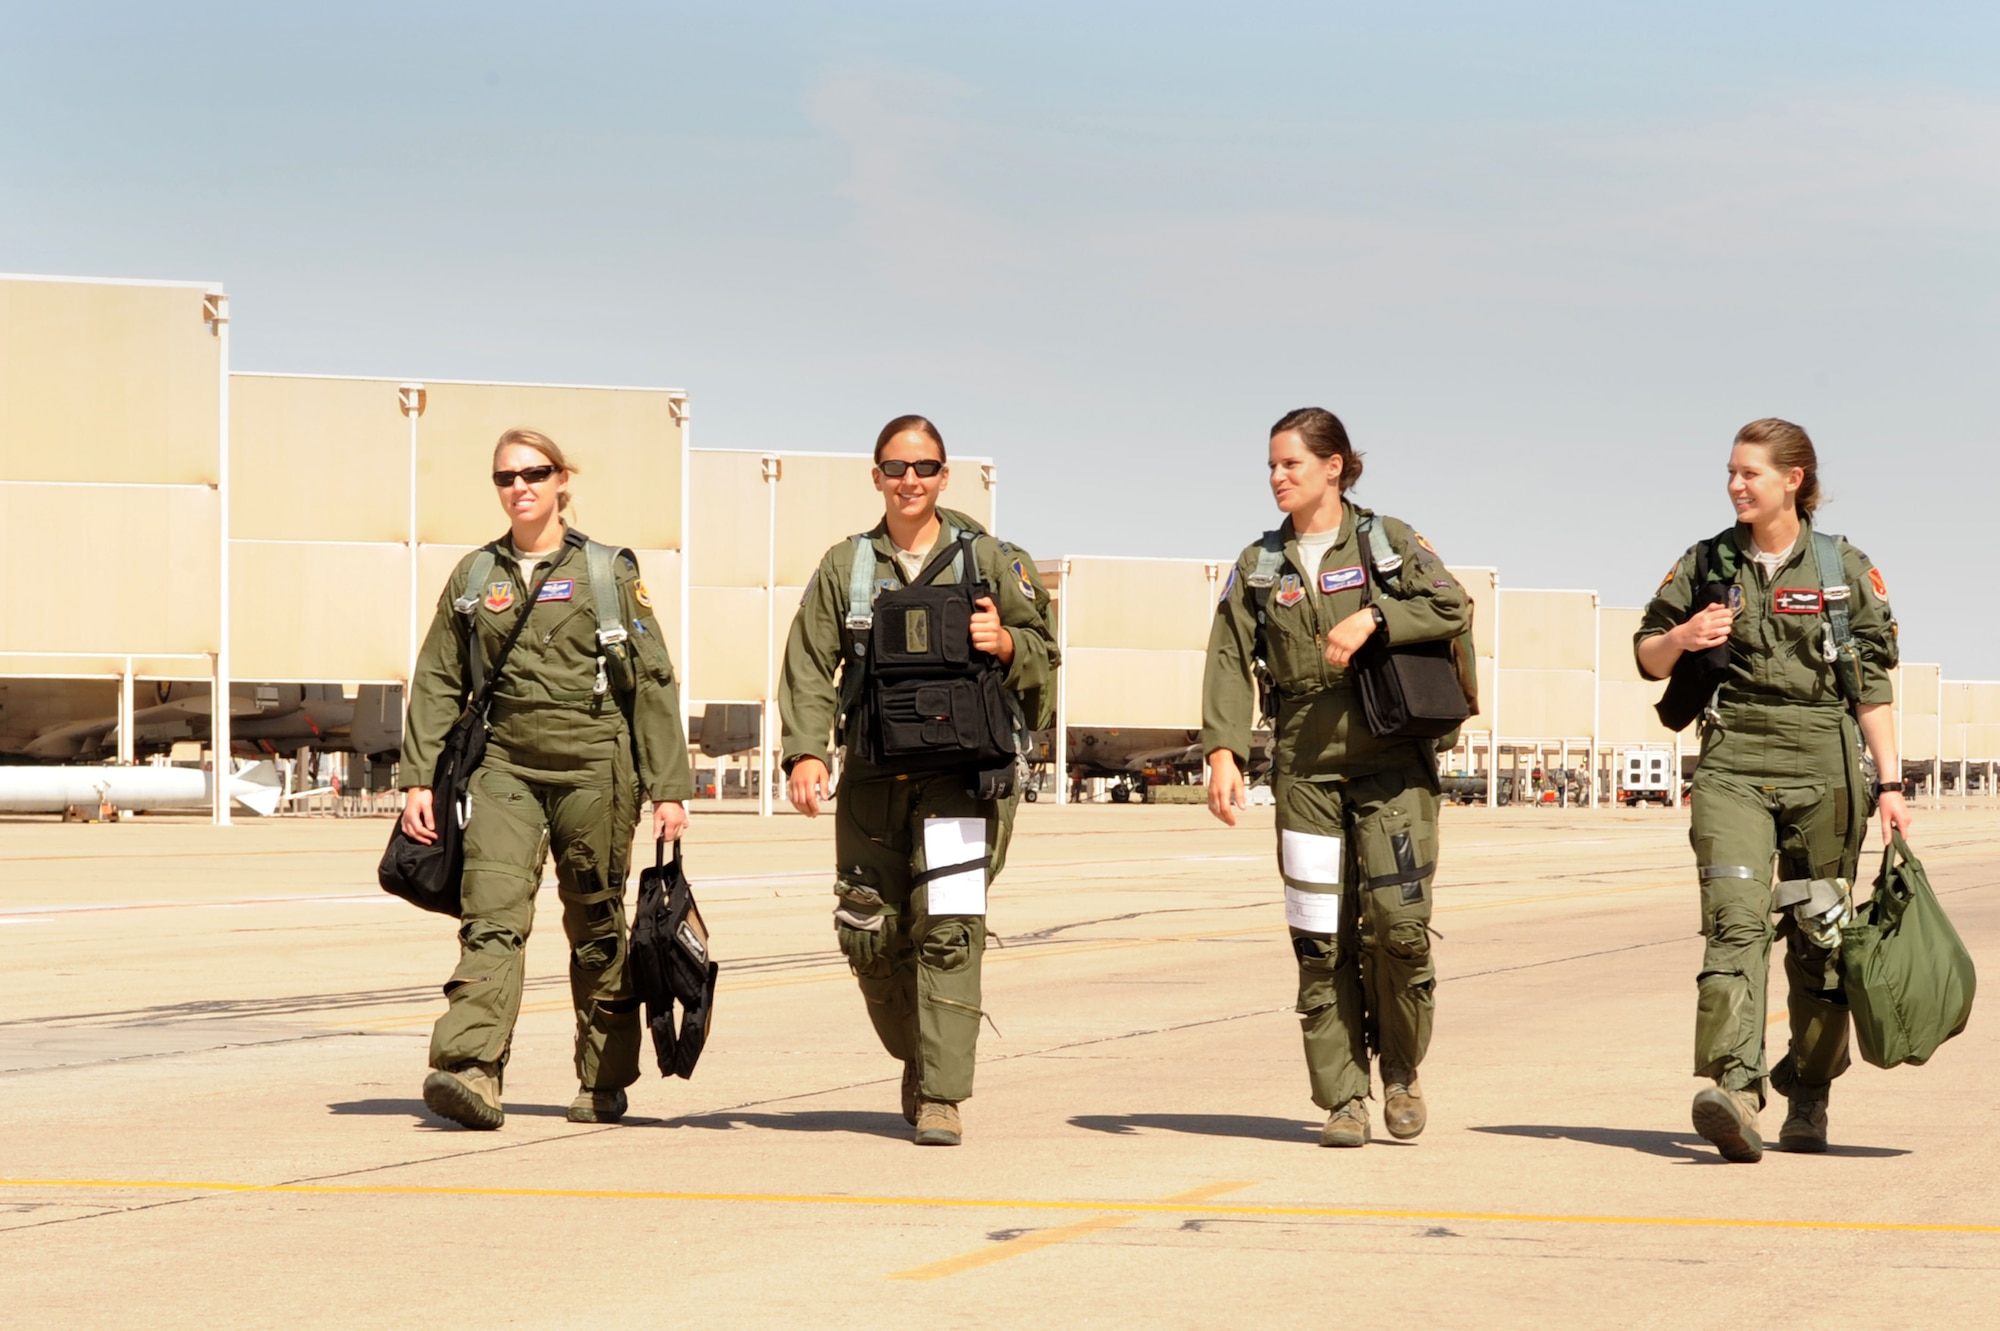 U.S. Air Force Capt. Kelly Nettleblad, Capt. Rachel Winiecki and 1st Lt. Jessica Wyble, 354th Fighter Squadron A-10 pilots and 1st Lt. Katherine Conrad 107th FS Selfridge Air National Guard Base, Michigan, A-10 pilot, walk across the flight line to their aircraft at Davis-Monthan Air Force Base, Ariz., May 5, 2014. They flew in a four ship together for Nettleblad’s final flight with the 354th Bulldogs. (U.S. Air Force photo be Airman 1st Class Cheyenne Morigeau/Released) 